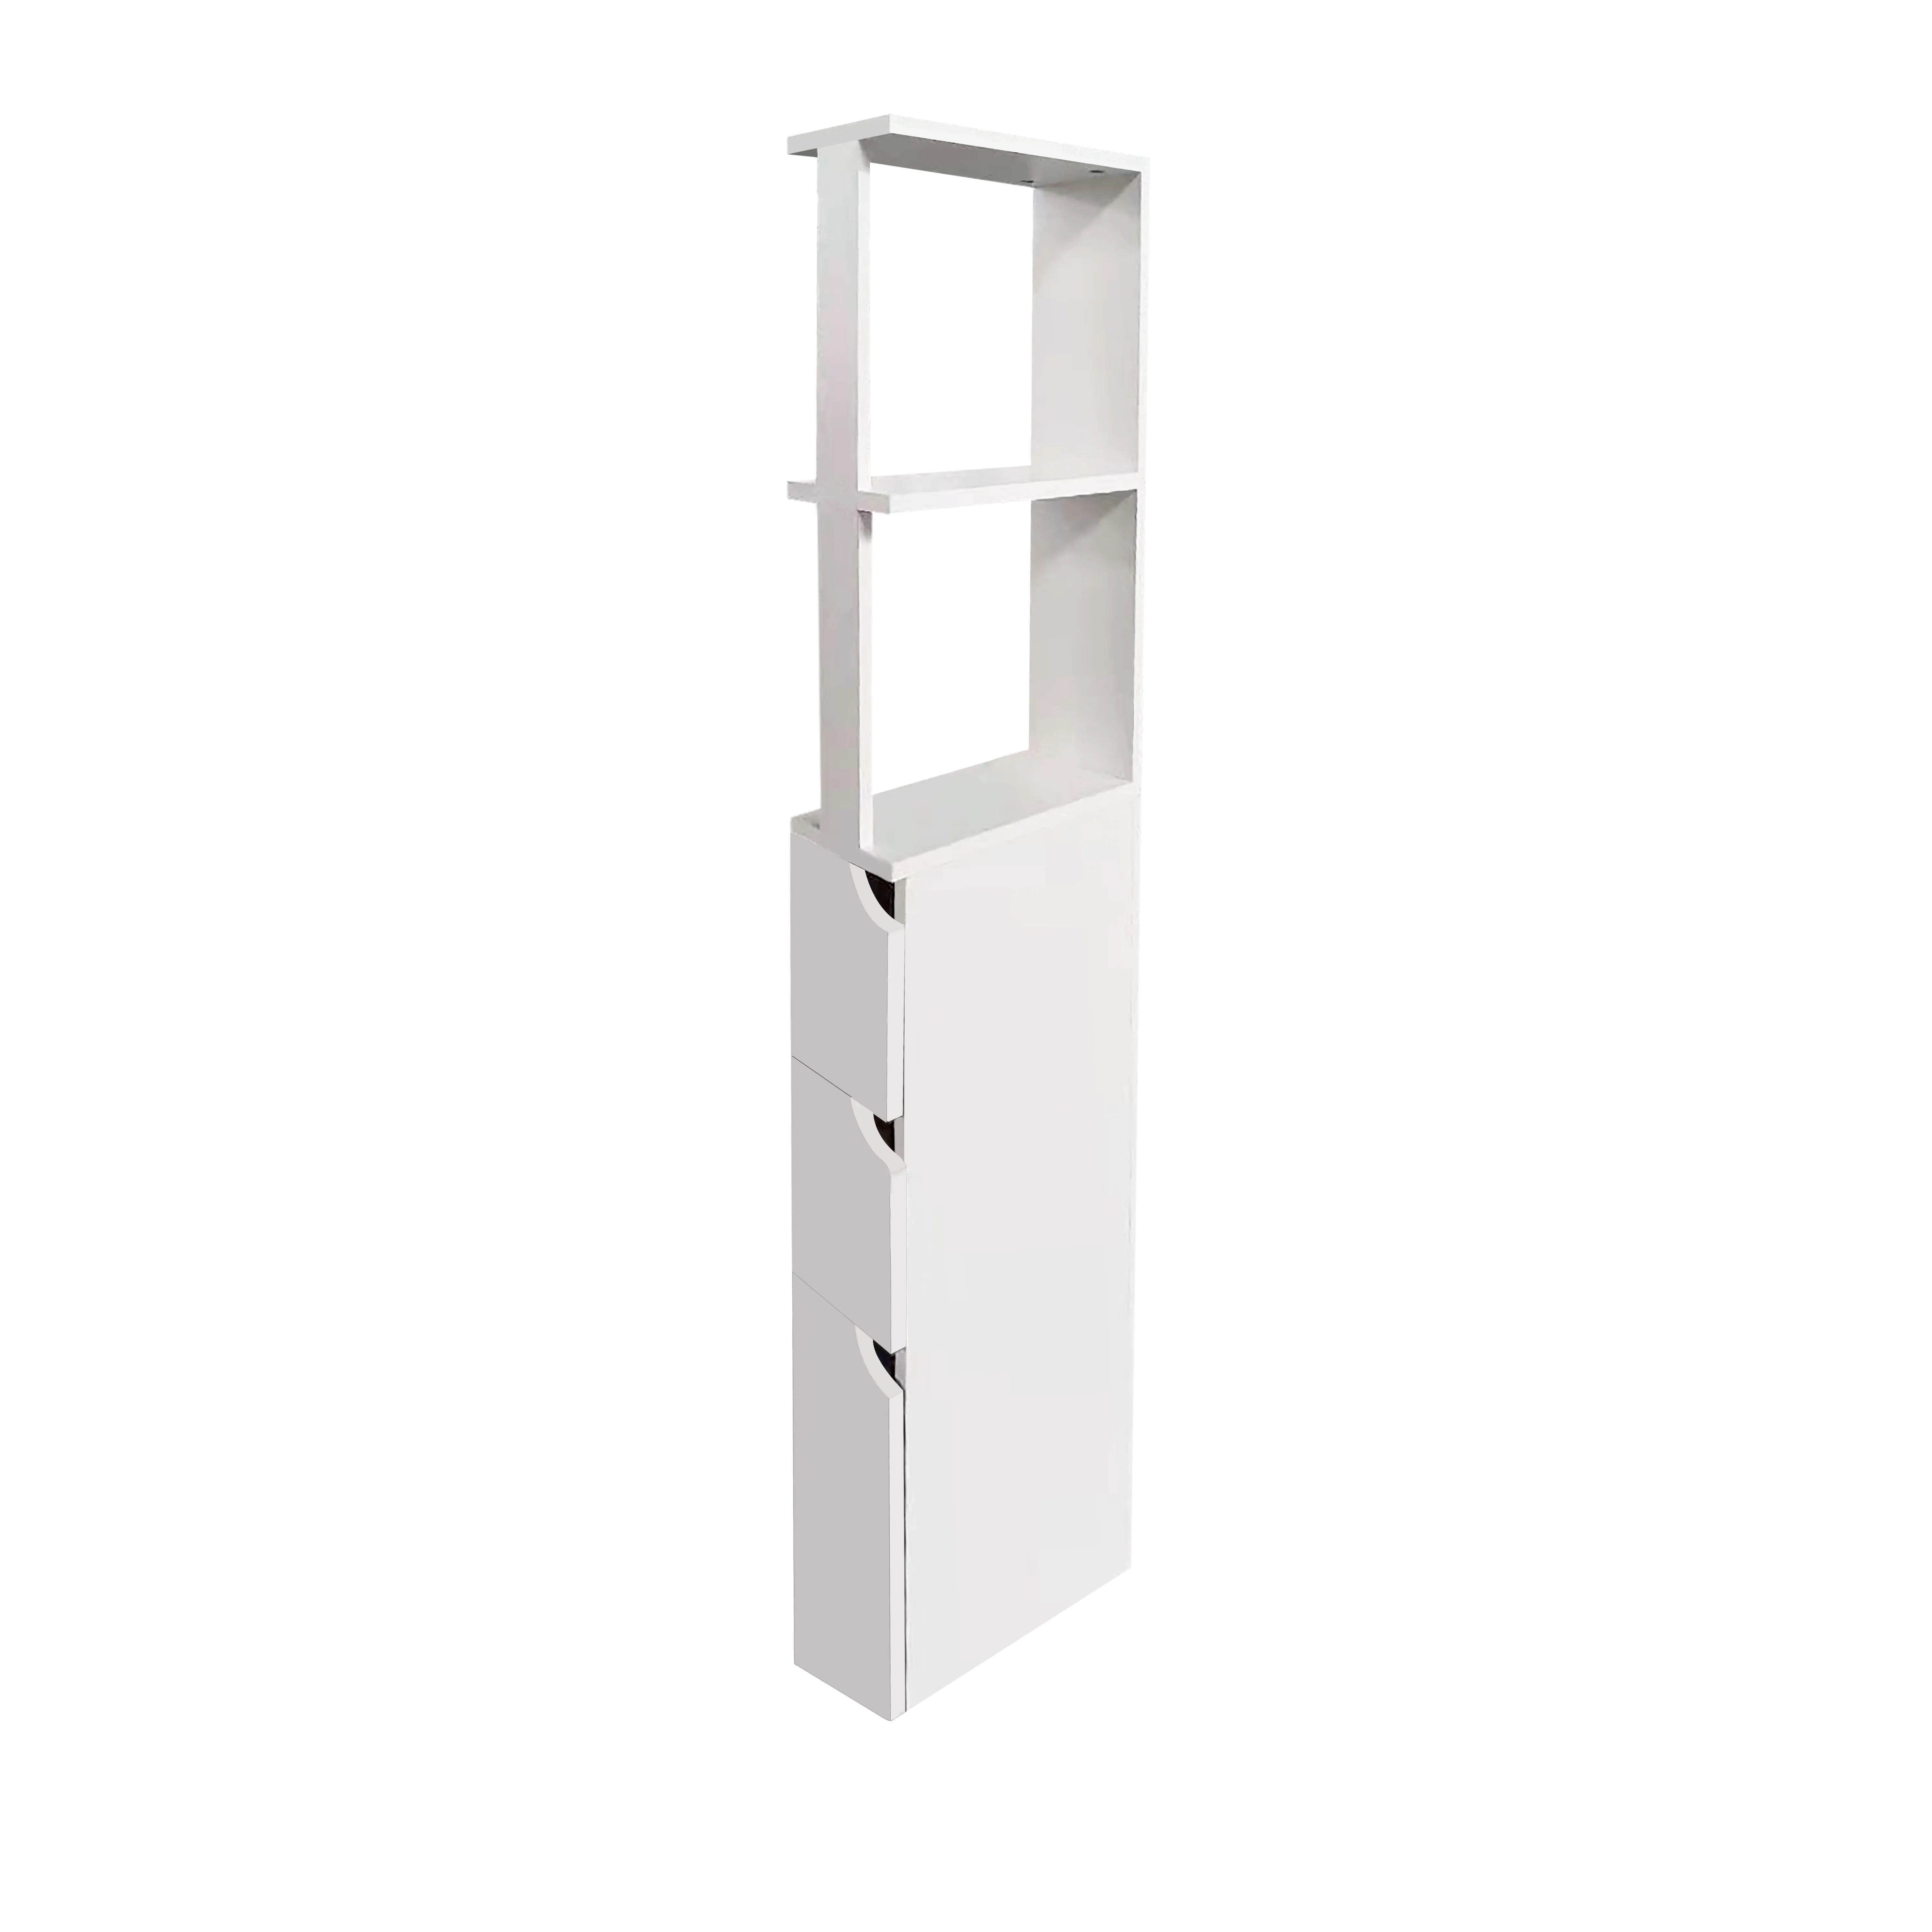 ZJH Floor Standing Tall Bathroom Storage Cabinet with Shelves and Drawers Bath Cabinet with Shelf